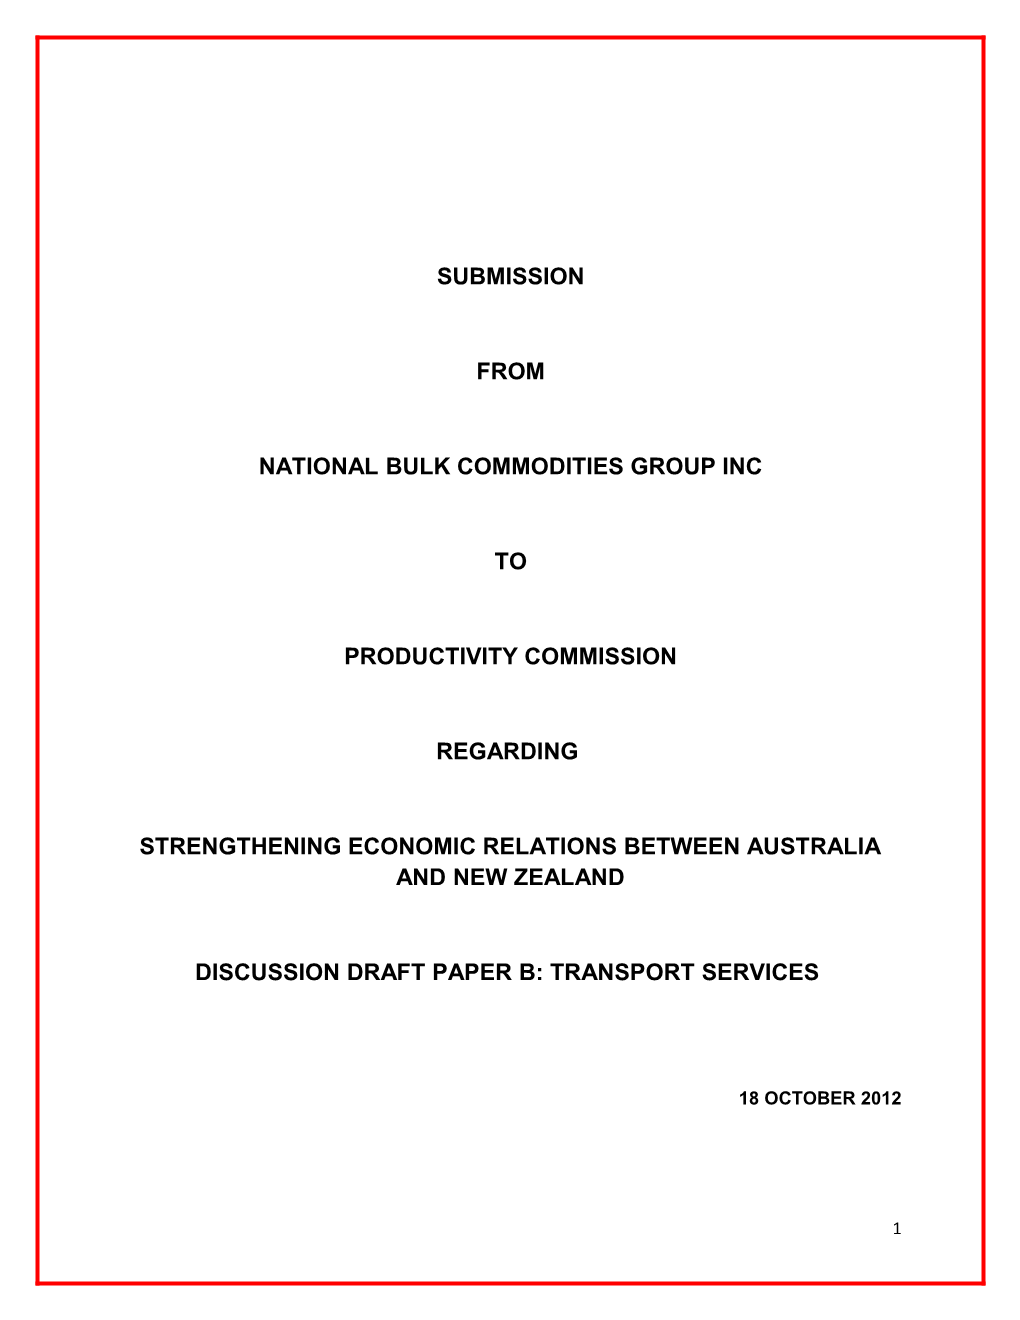 Submission DR93 - National Bulk Commodities Group Inc - Strengthening Economic Relations